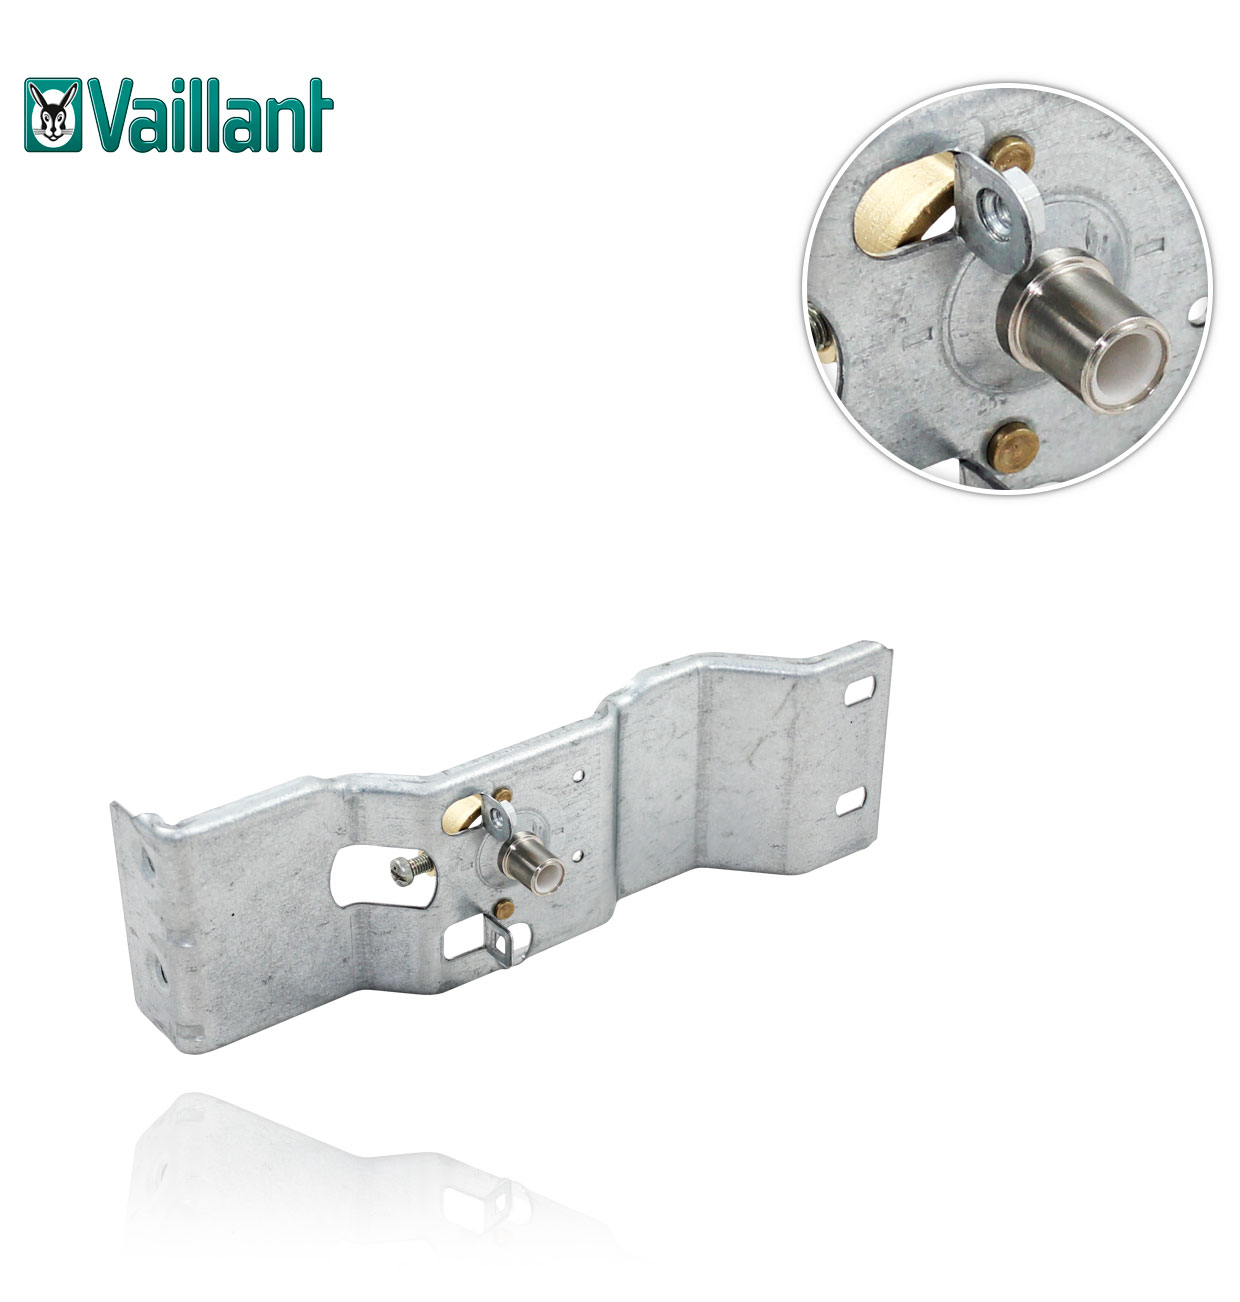 VAILLANT 0020107703 WATER UNIT SUPPORT